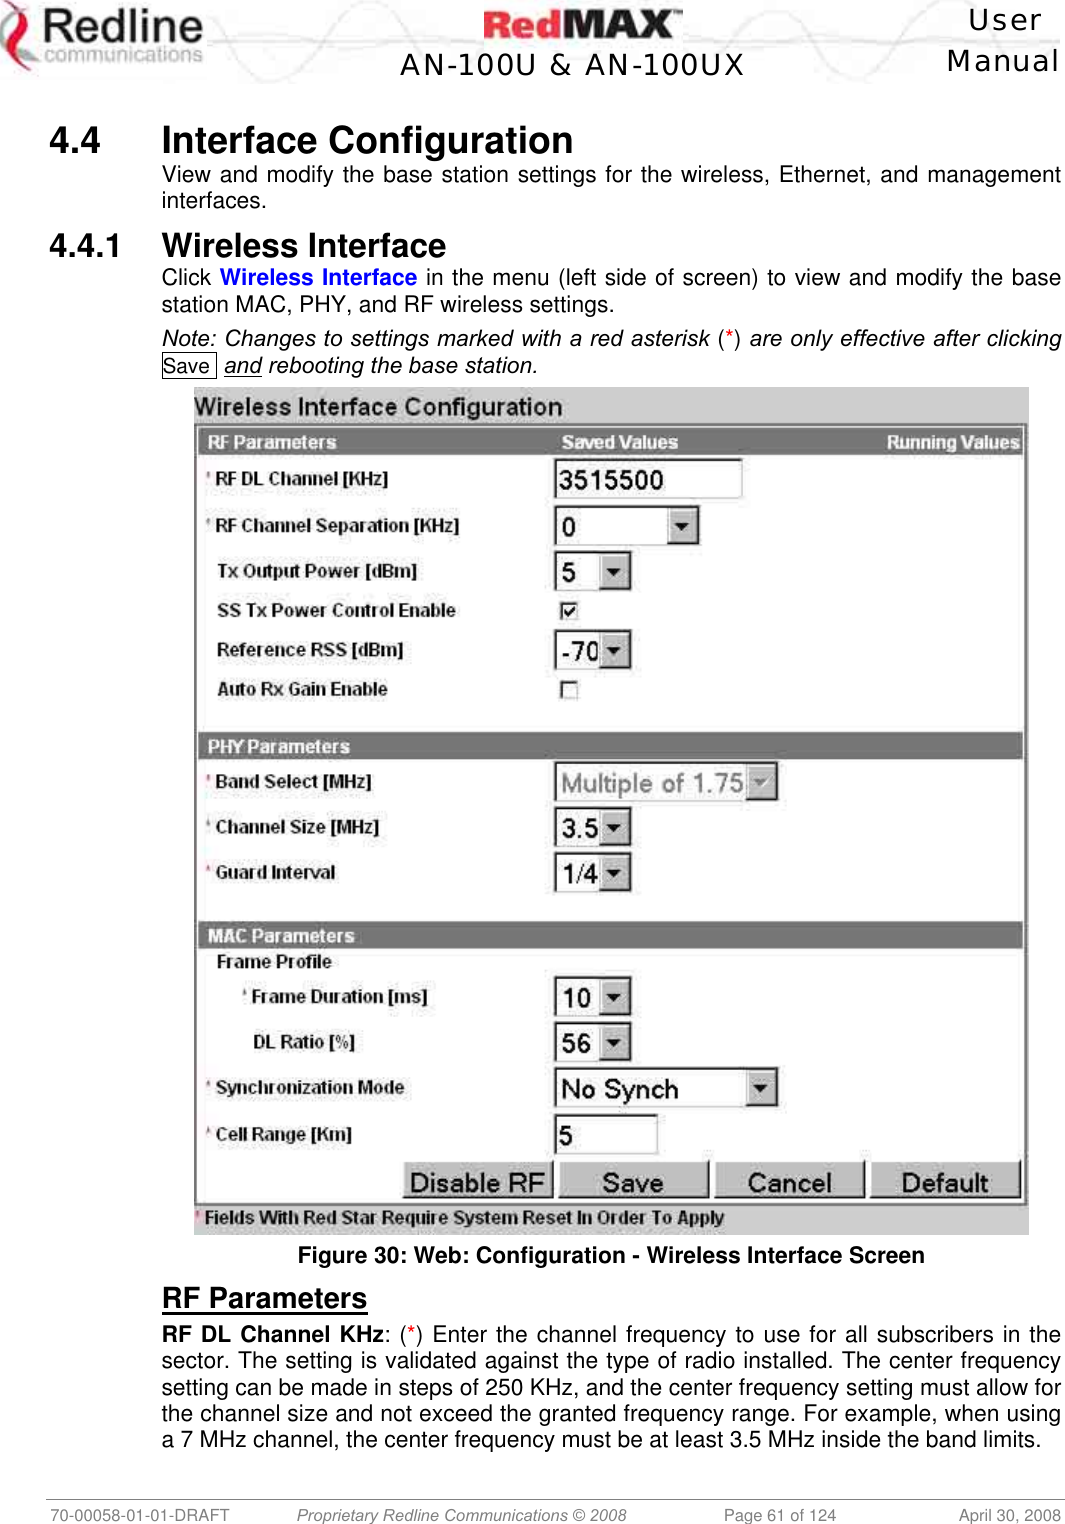    User  AN-100U &amp; AN-100UX Manual   70-00058-01-01-DRAFT  Proprietary Redline Communications © 2008   Page 61 of 124  April 30, 2008  4.4 Interface Configuration View and modify the base station settings for the wireless, Ethernet, and management interfaces. 4.4.1 Wireless Interface Click Wireless Interface in the menu (left side of screen) to view and modify the base station MAC, PHY, and RF wireless settings. Note: Changes to settings marked with a red asterisk (*) are only effective after clicking Save  and rebooting the base station.  Figure 30: Web: Configuration - Wireless Interface Screen RF Parameters RF DL Channel KHz: (*) Enter the channel frequency to use for all subscribers in the sector. The setting is validated against the type of radio installed. The center frequency setting can be made in steps of 250 KHz, and the center frequency setting must allow for the channel size and not exceed the granted frequency range. For example, when using a 7 MHz channel, the center frequency must be at least 3.5 MHz inside the band limits. 